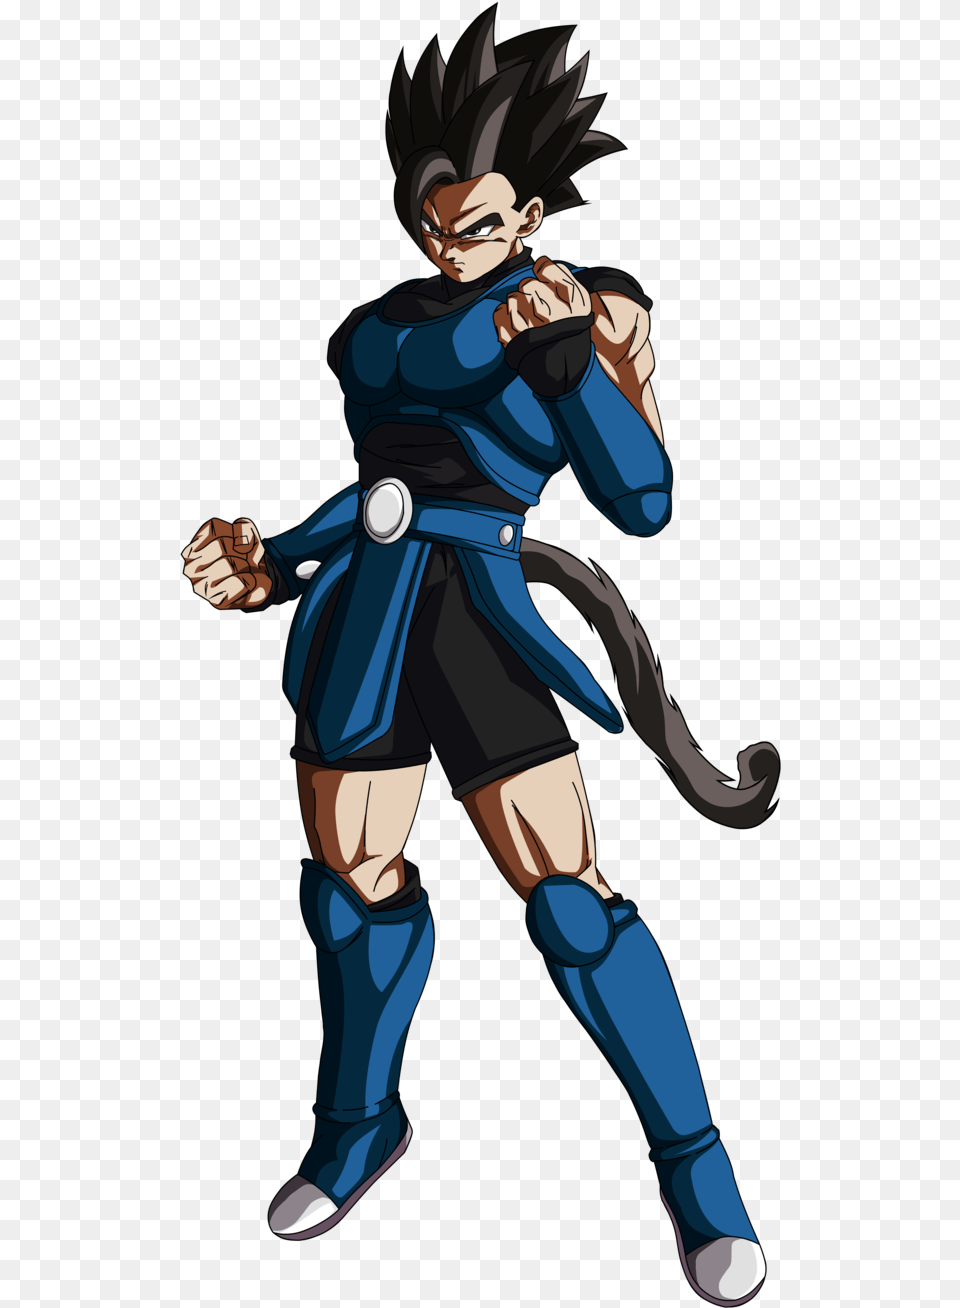 Sharotto Dragon Ball Legends Renders By Gokuxdxdxdz Dragon Ball Legends Shallot, Publication, Book, Comics, Adult Png Image